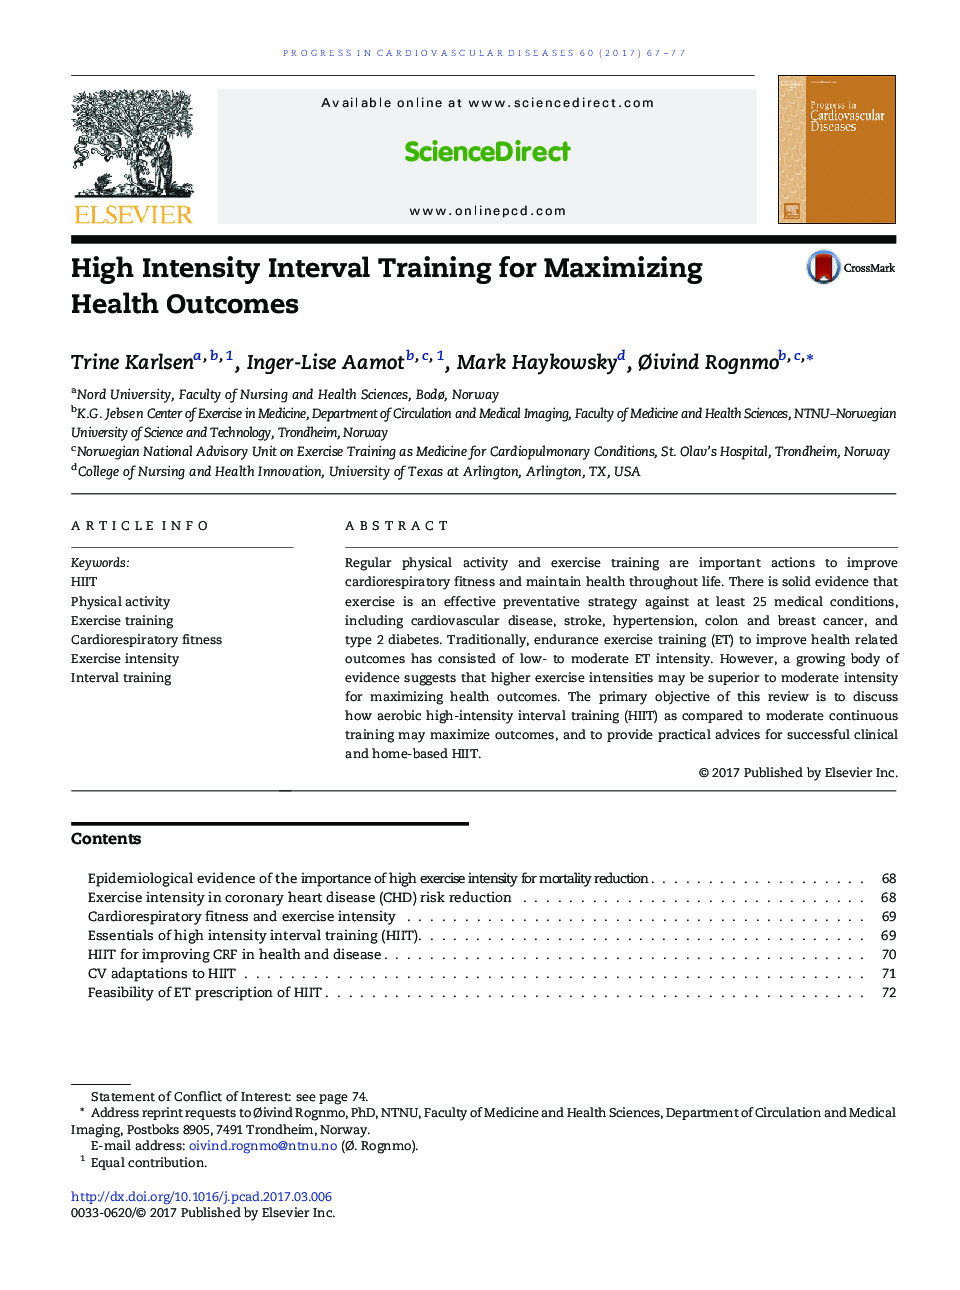 High Intensity Interval Training for Maximizing Health Outcomes